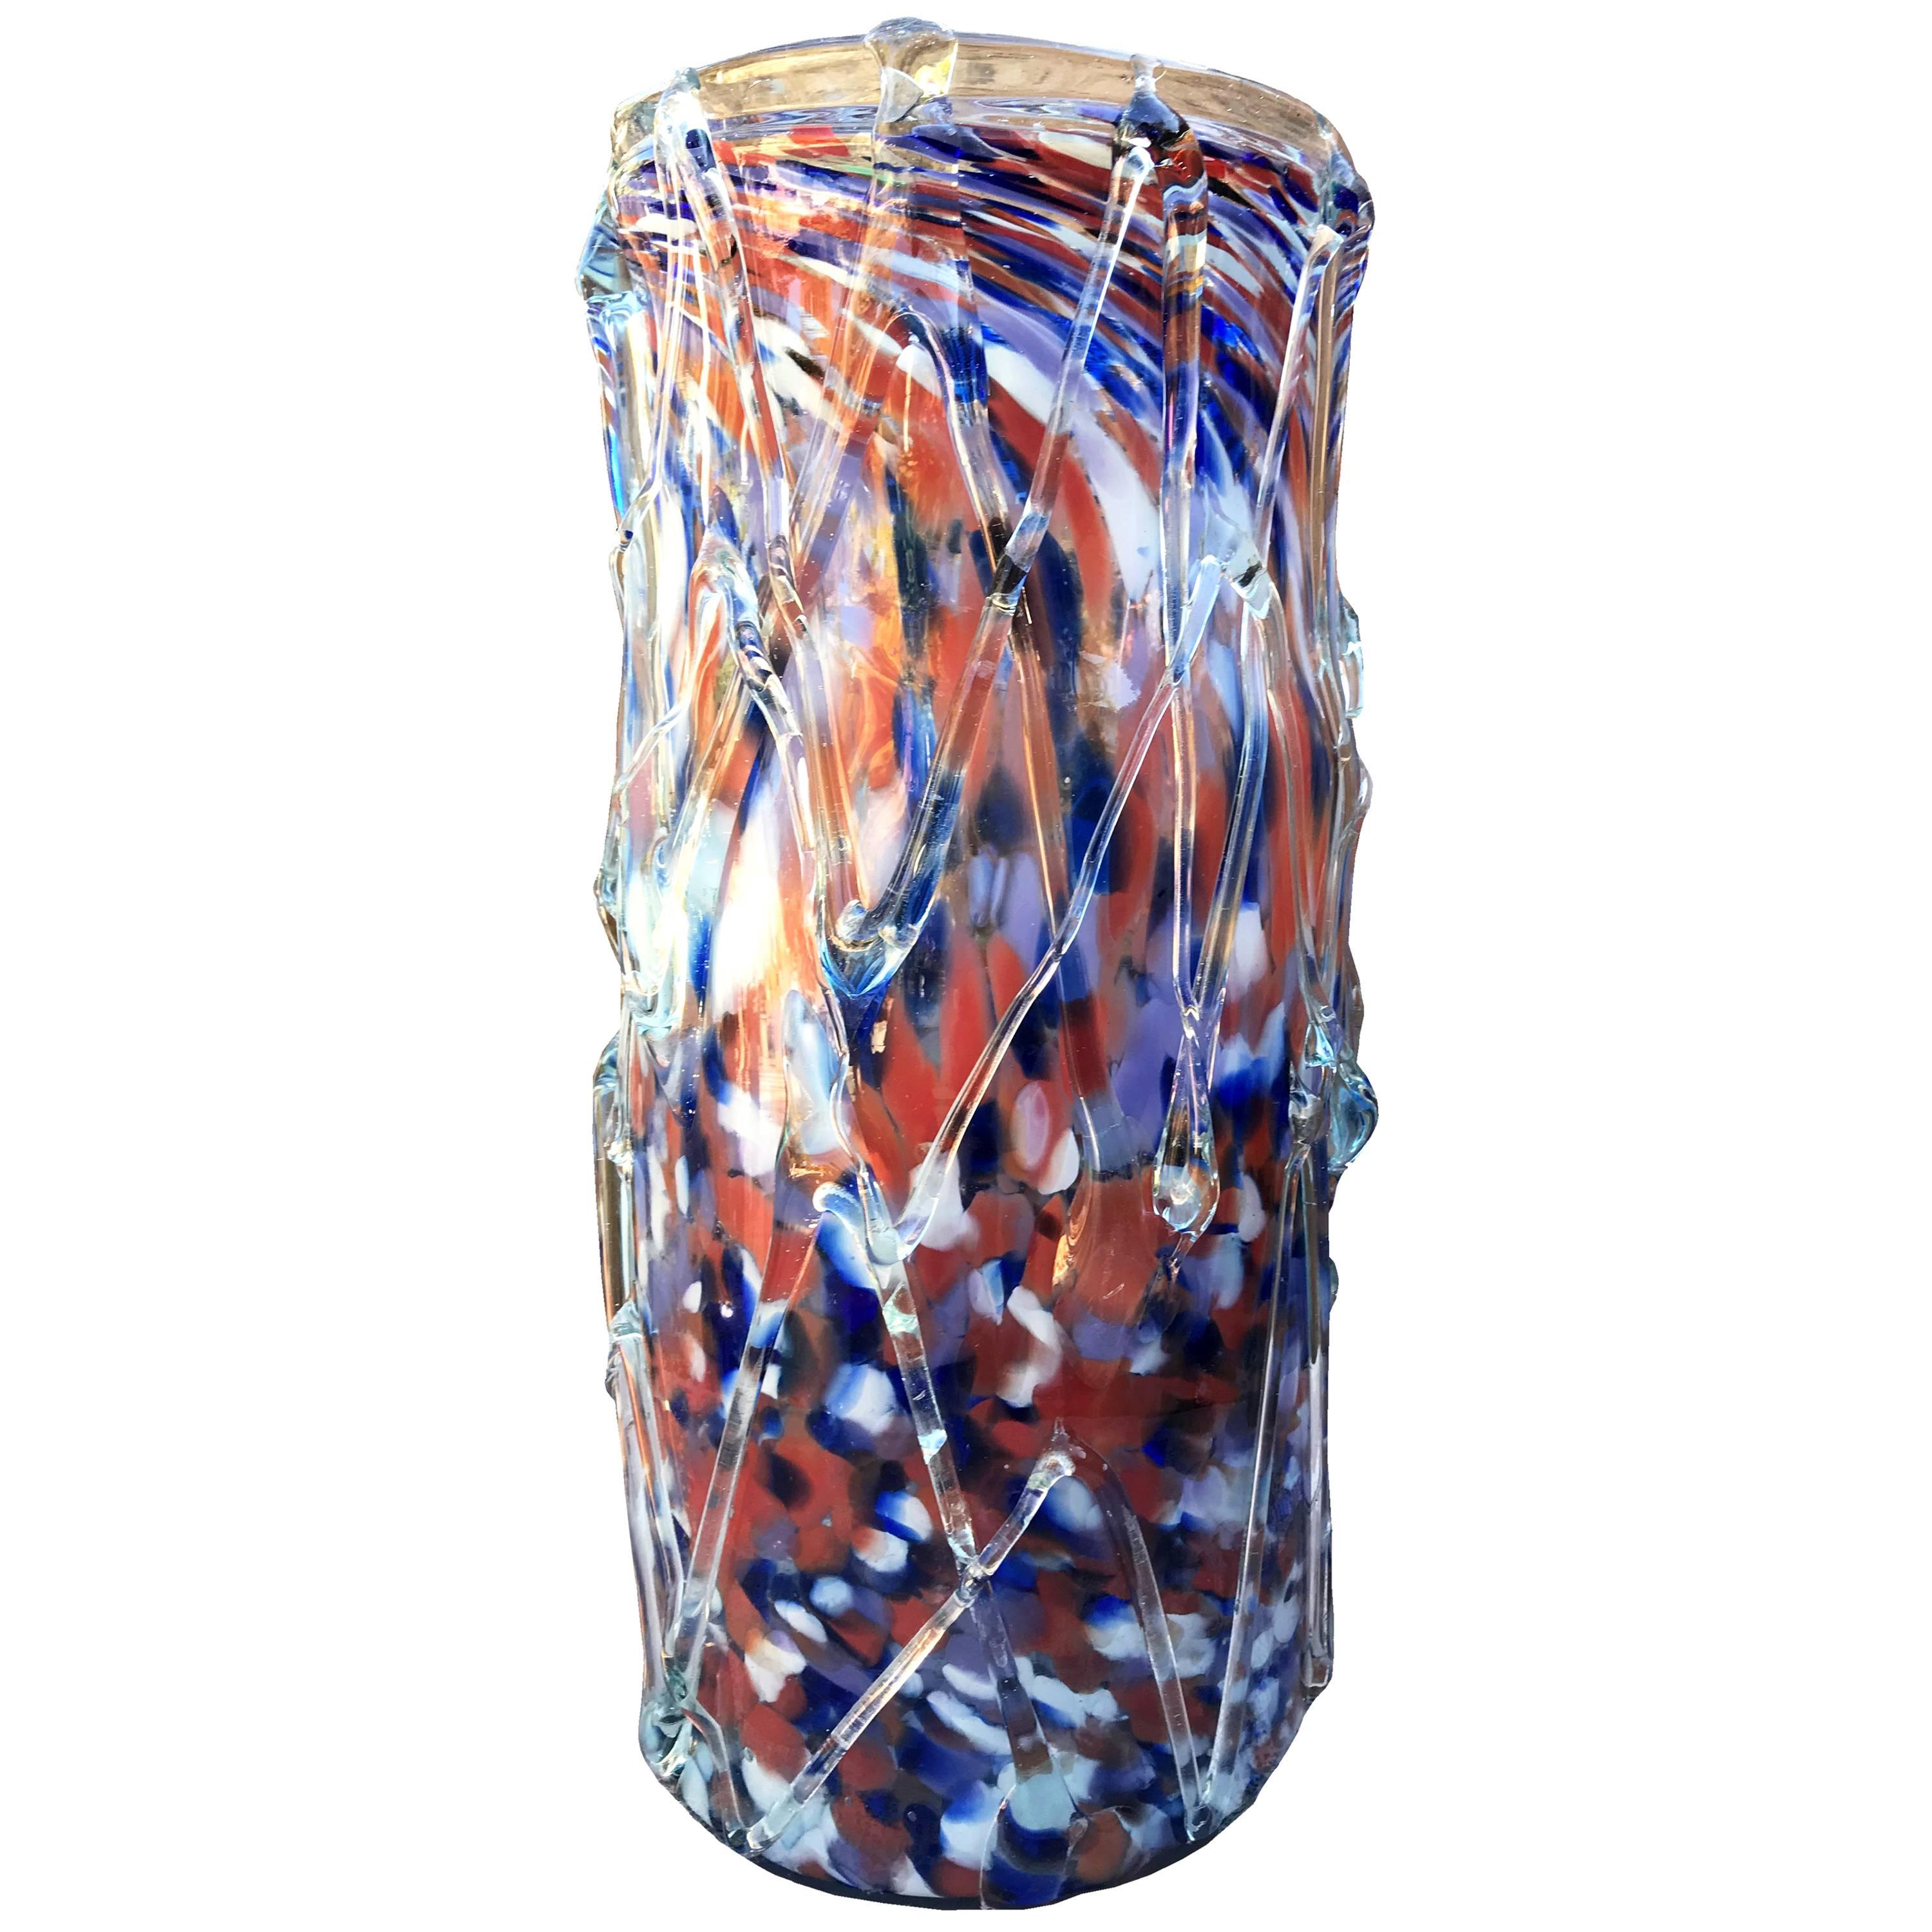 1970s Italian Murano Colored Glass Vase For Sale at 1stDibs